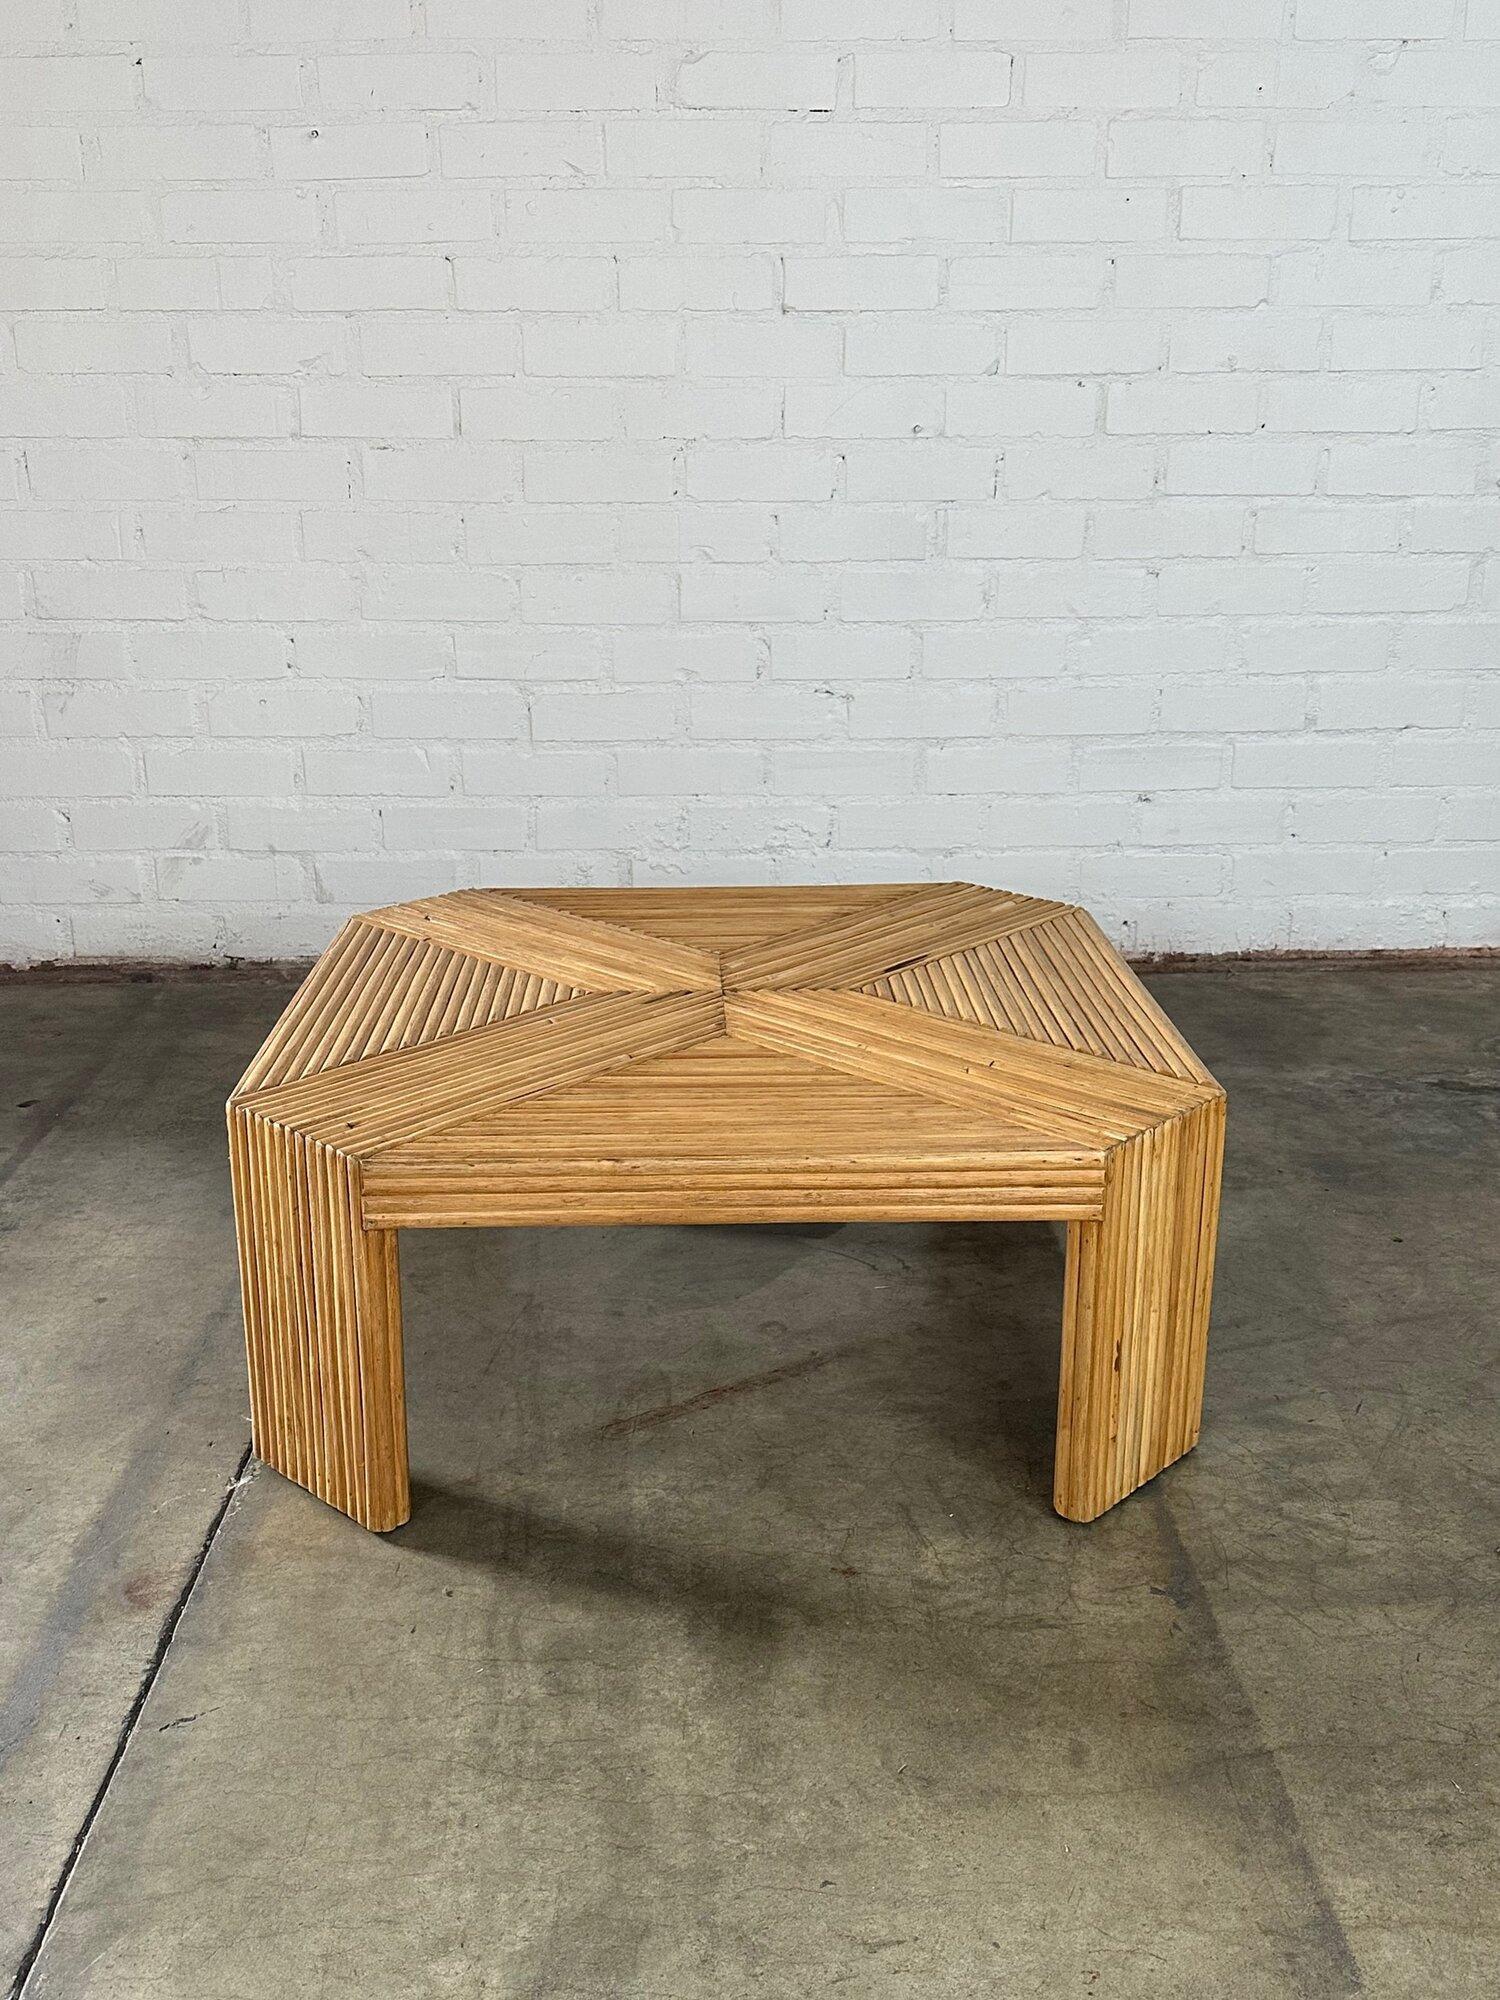 W38 D38 H15

Fully restored pencil reed coffee table has been reinforced and secured for sound structural stability. Item has also been washed and resealed. Item shows in overall great condtion.